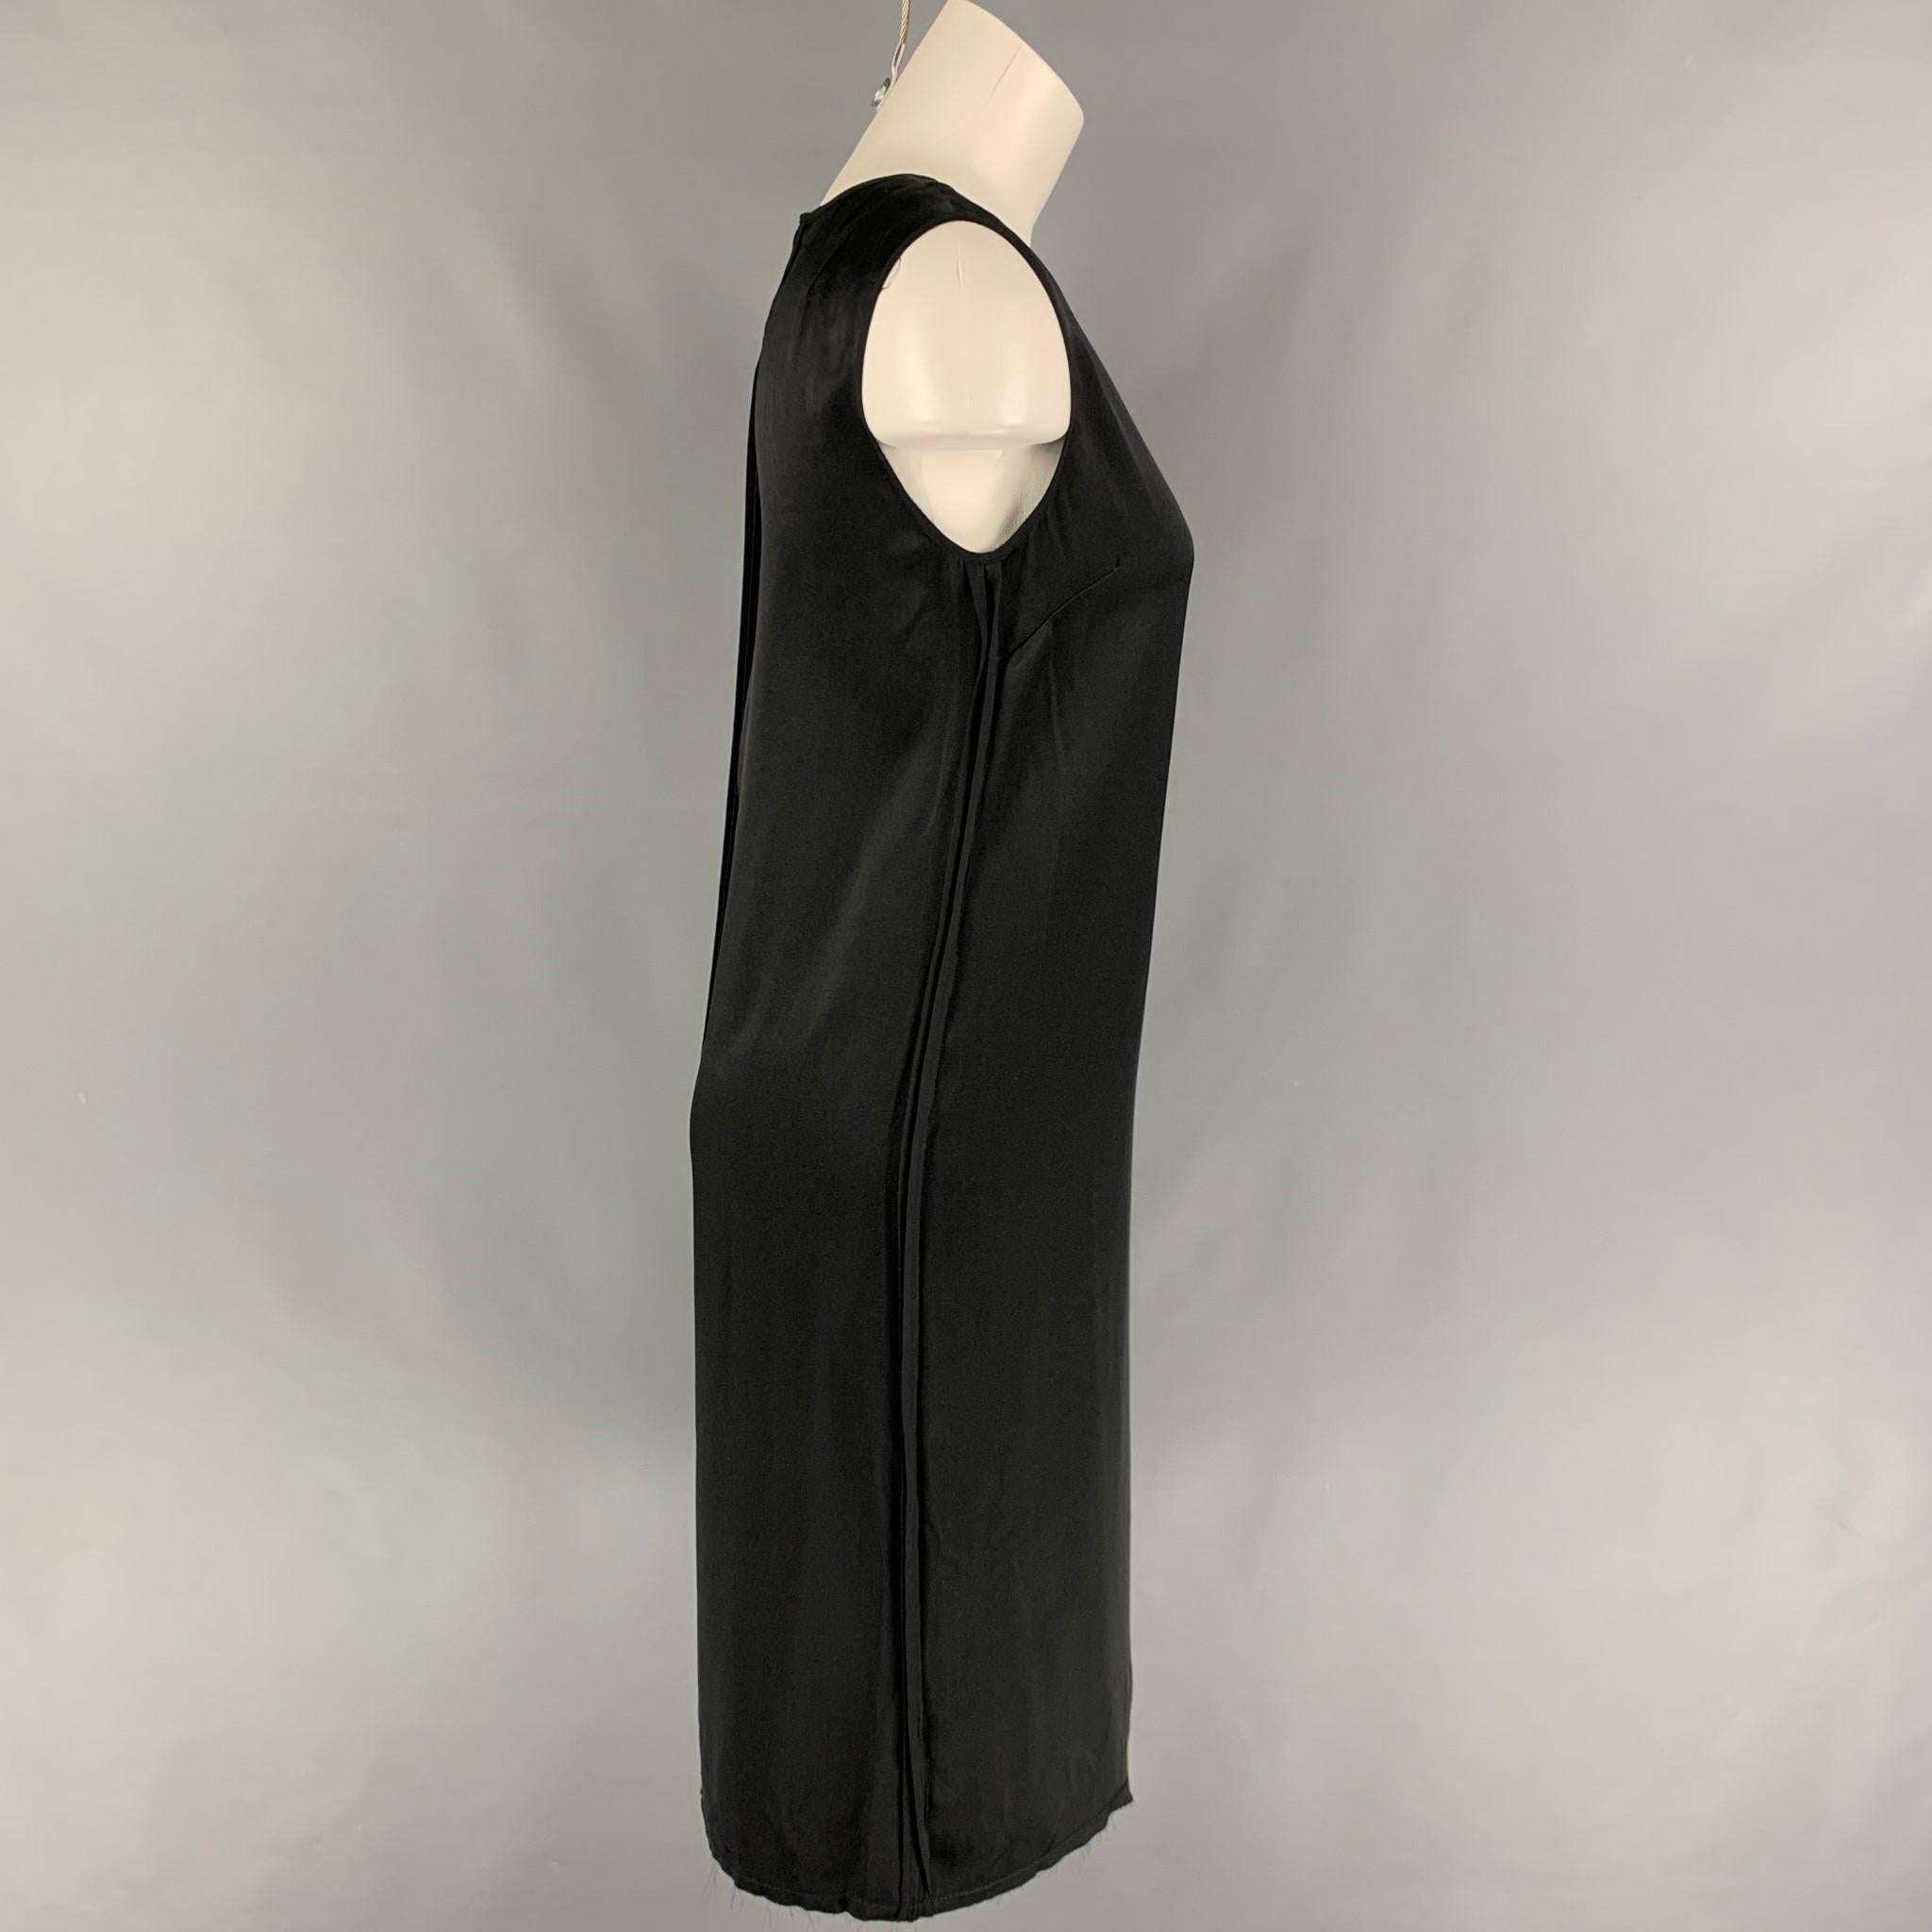 HELMUT LANG dress comes in a black silk featuring a shift style, sleeveless, and a hook & loop closure. 

Very Good Pre-Owned Condition.
Marked: XS

Measurements:

Shoulder: 15 in.
Bust: 32 in.
Length: 41 in. 